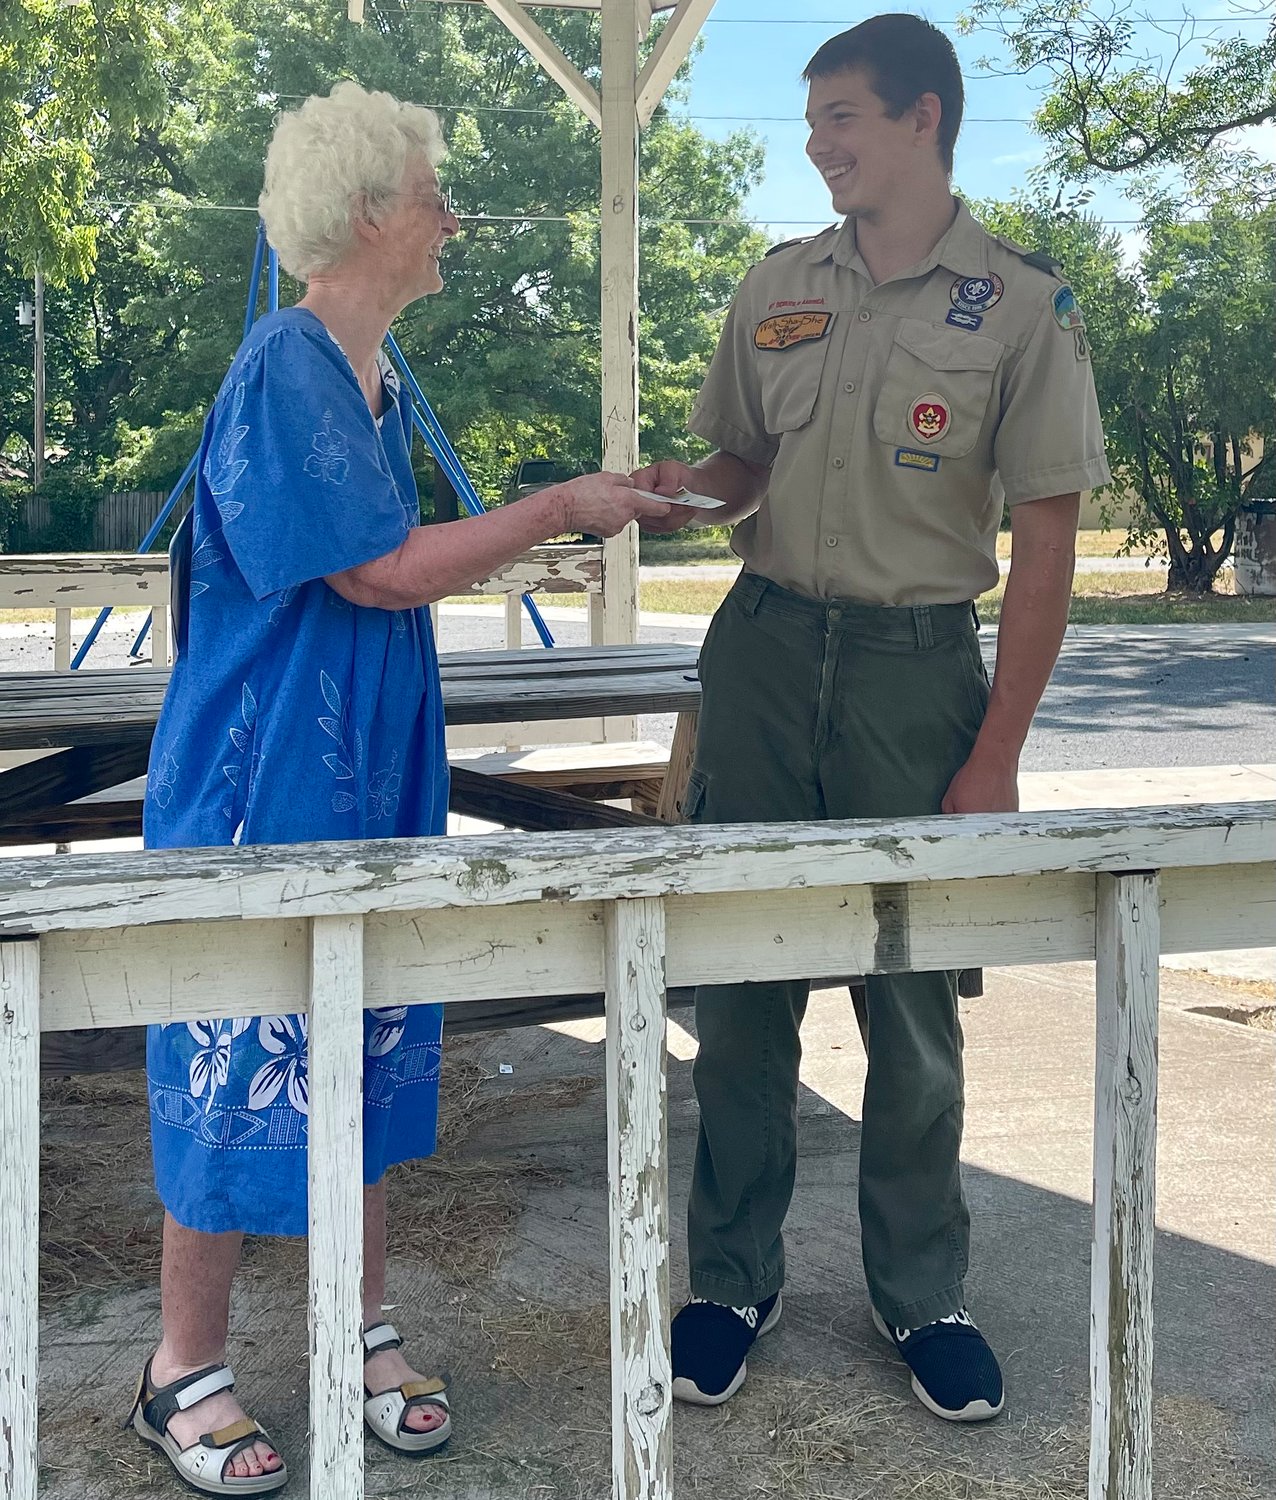 Nora Seery presents Logan with a donation from her son Jim Seery. Jim was the original Boy Scout who built the gazebo at Hartley park thirty years ago.